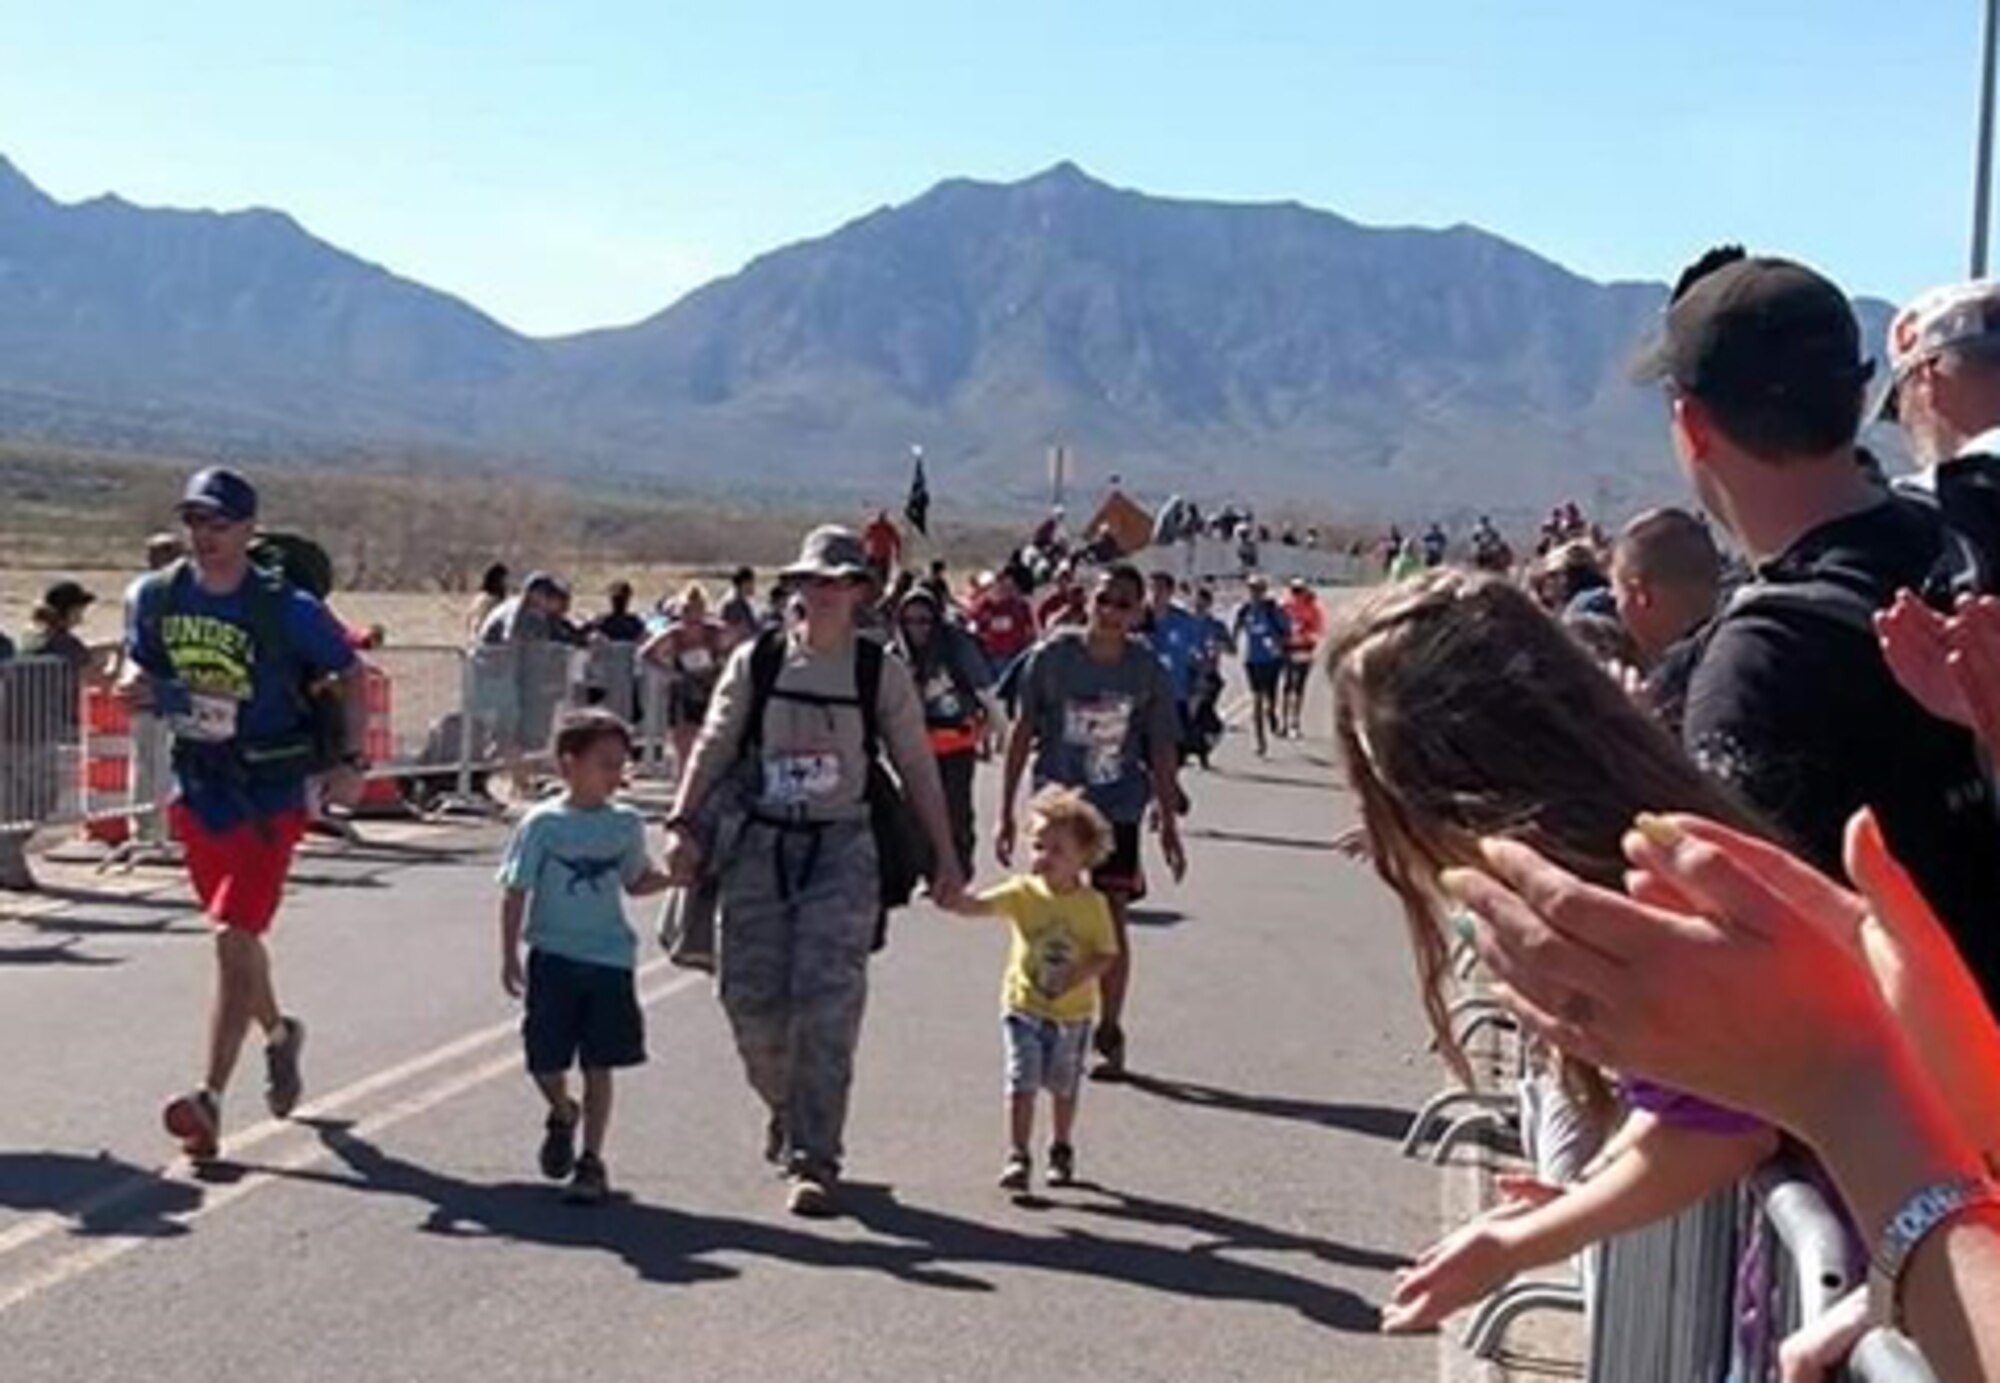 Tech. Sgt. Julia Getter, 53rd Test Support Squadron weapons evaluation group logistics manager, crosses the finish line of the Bataan Memorial Death March with her kids. This was Getter’s fifth time taking part in the grueling 26.2-mile march.  (Courtesy photo)